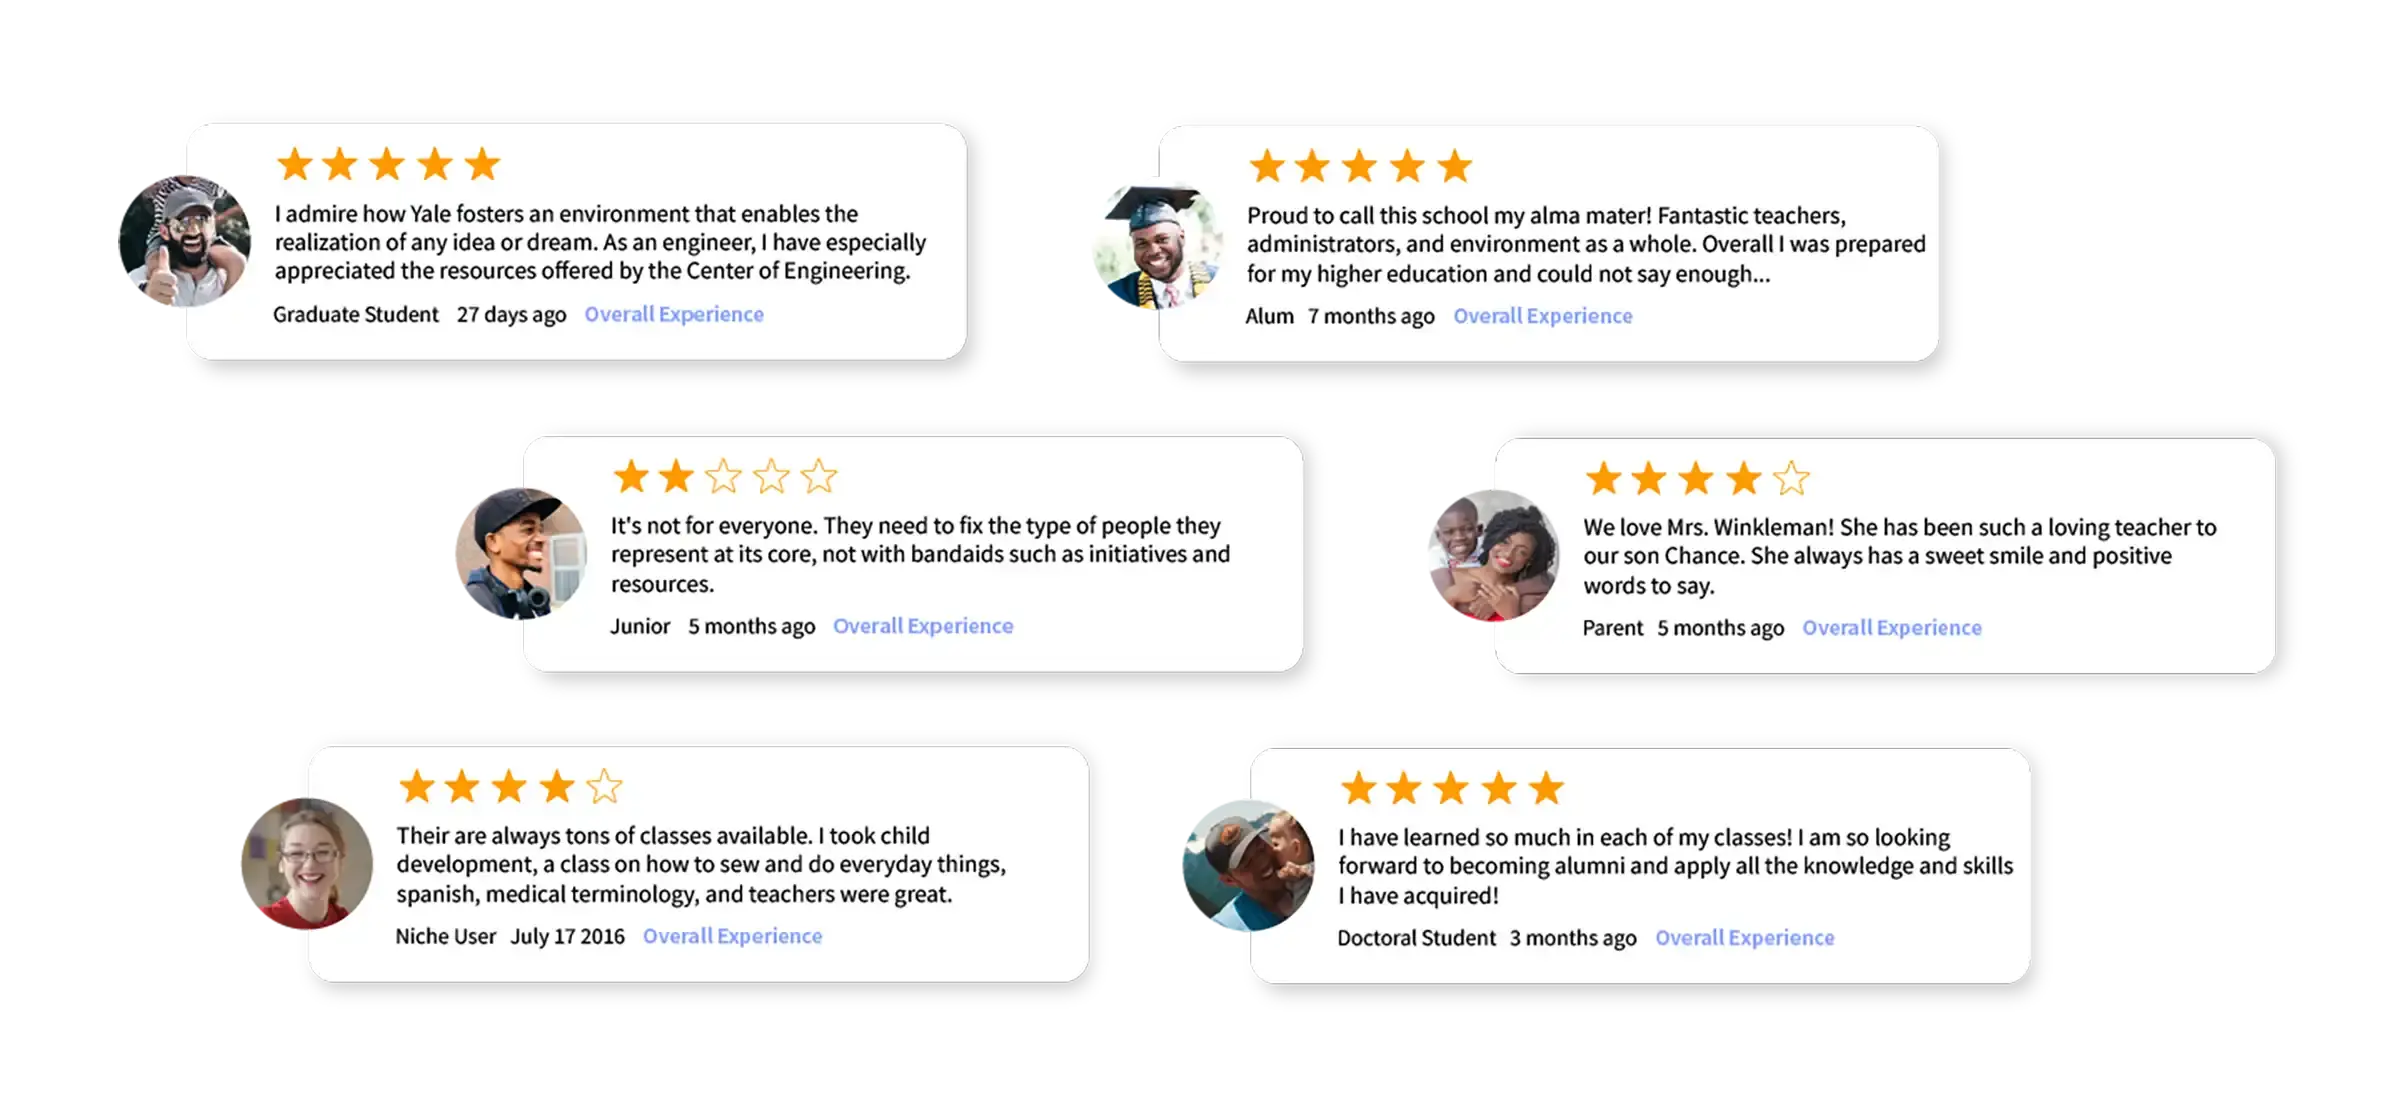 Image of six reviews from different people commenting on their school experiences